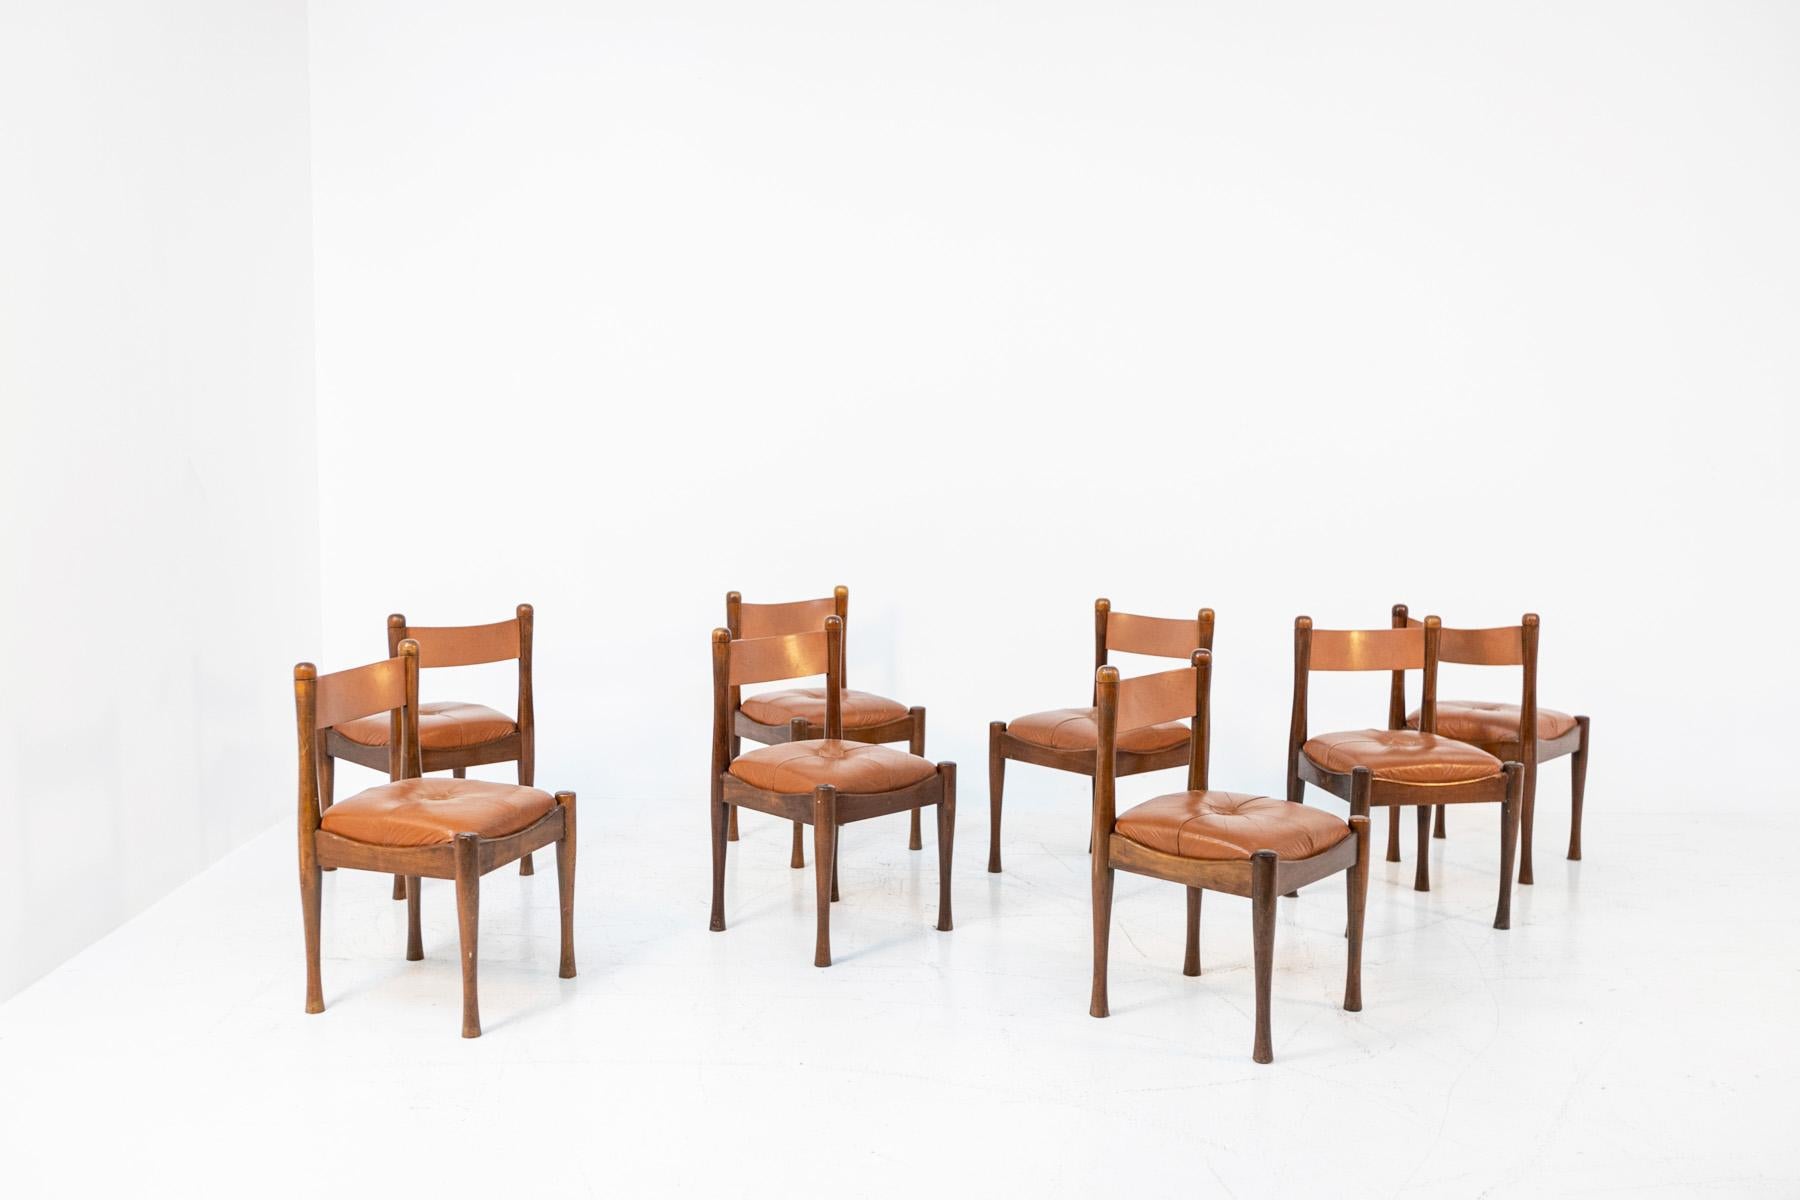 Set of eight Italian dining chairs from the 1960s designed by Silvio Coppola for the Bernini manufacture. The chairs are made of beech wood. The seat is made of cushion with light brown leather upholstery with central button. The back is made with a